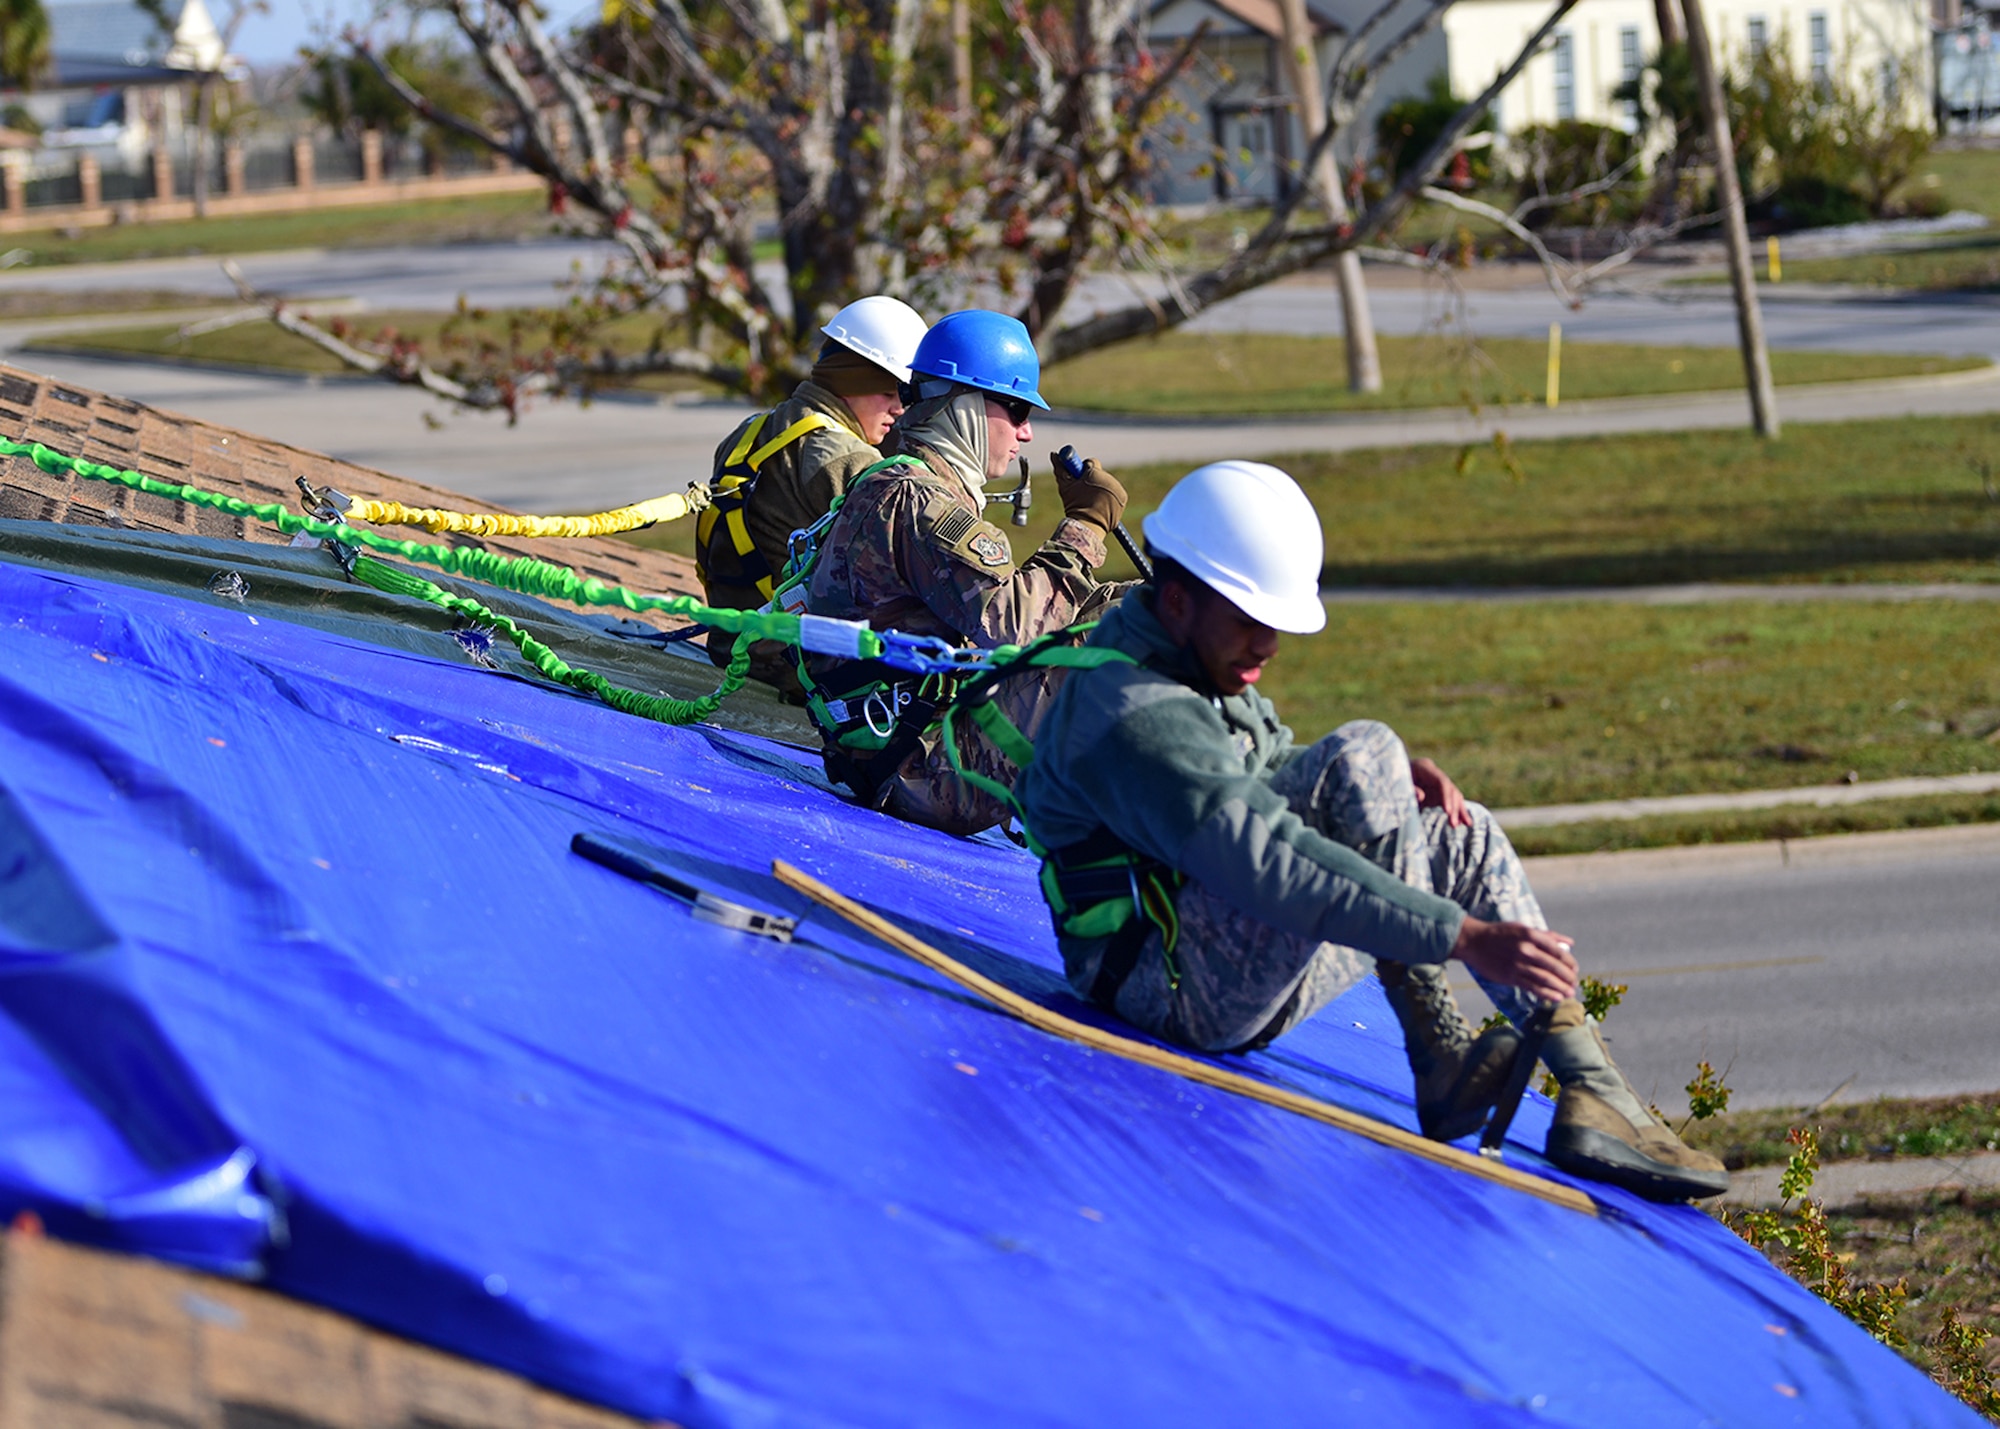 From left to right, Senior Airman Jake Stauffer and Airmen 1st Class Marc Karns and Ikiem Williams, members of Task Force Phoenix, repair a damaged rooftop at Tyndall Air Force Base, Fla., Nov. 28, 2018. Task Force Phoenix is responsible for large-scale clean up and reconstruction after Hurricane Michael ravaged Tyndall Air Force Base and the panhandle of Florida. (U.S. Air Force photo by Senior Airman Isaiah J. Soliz)